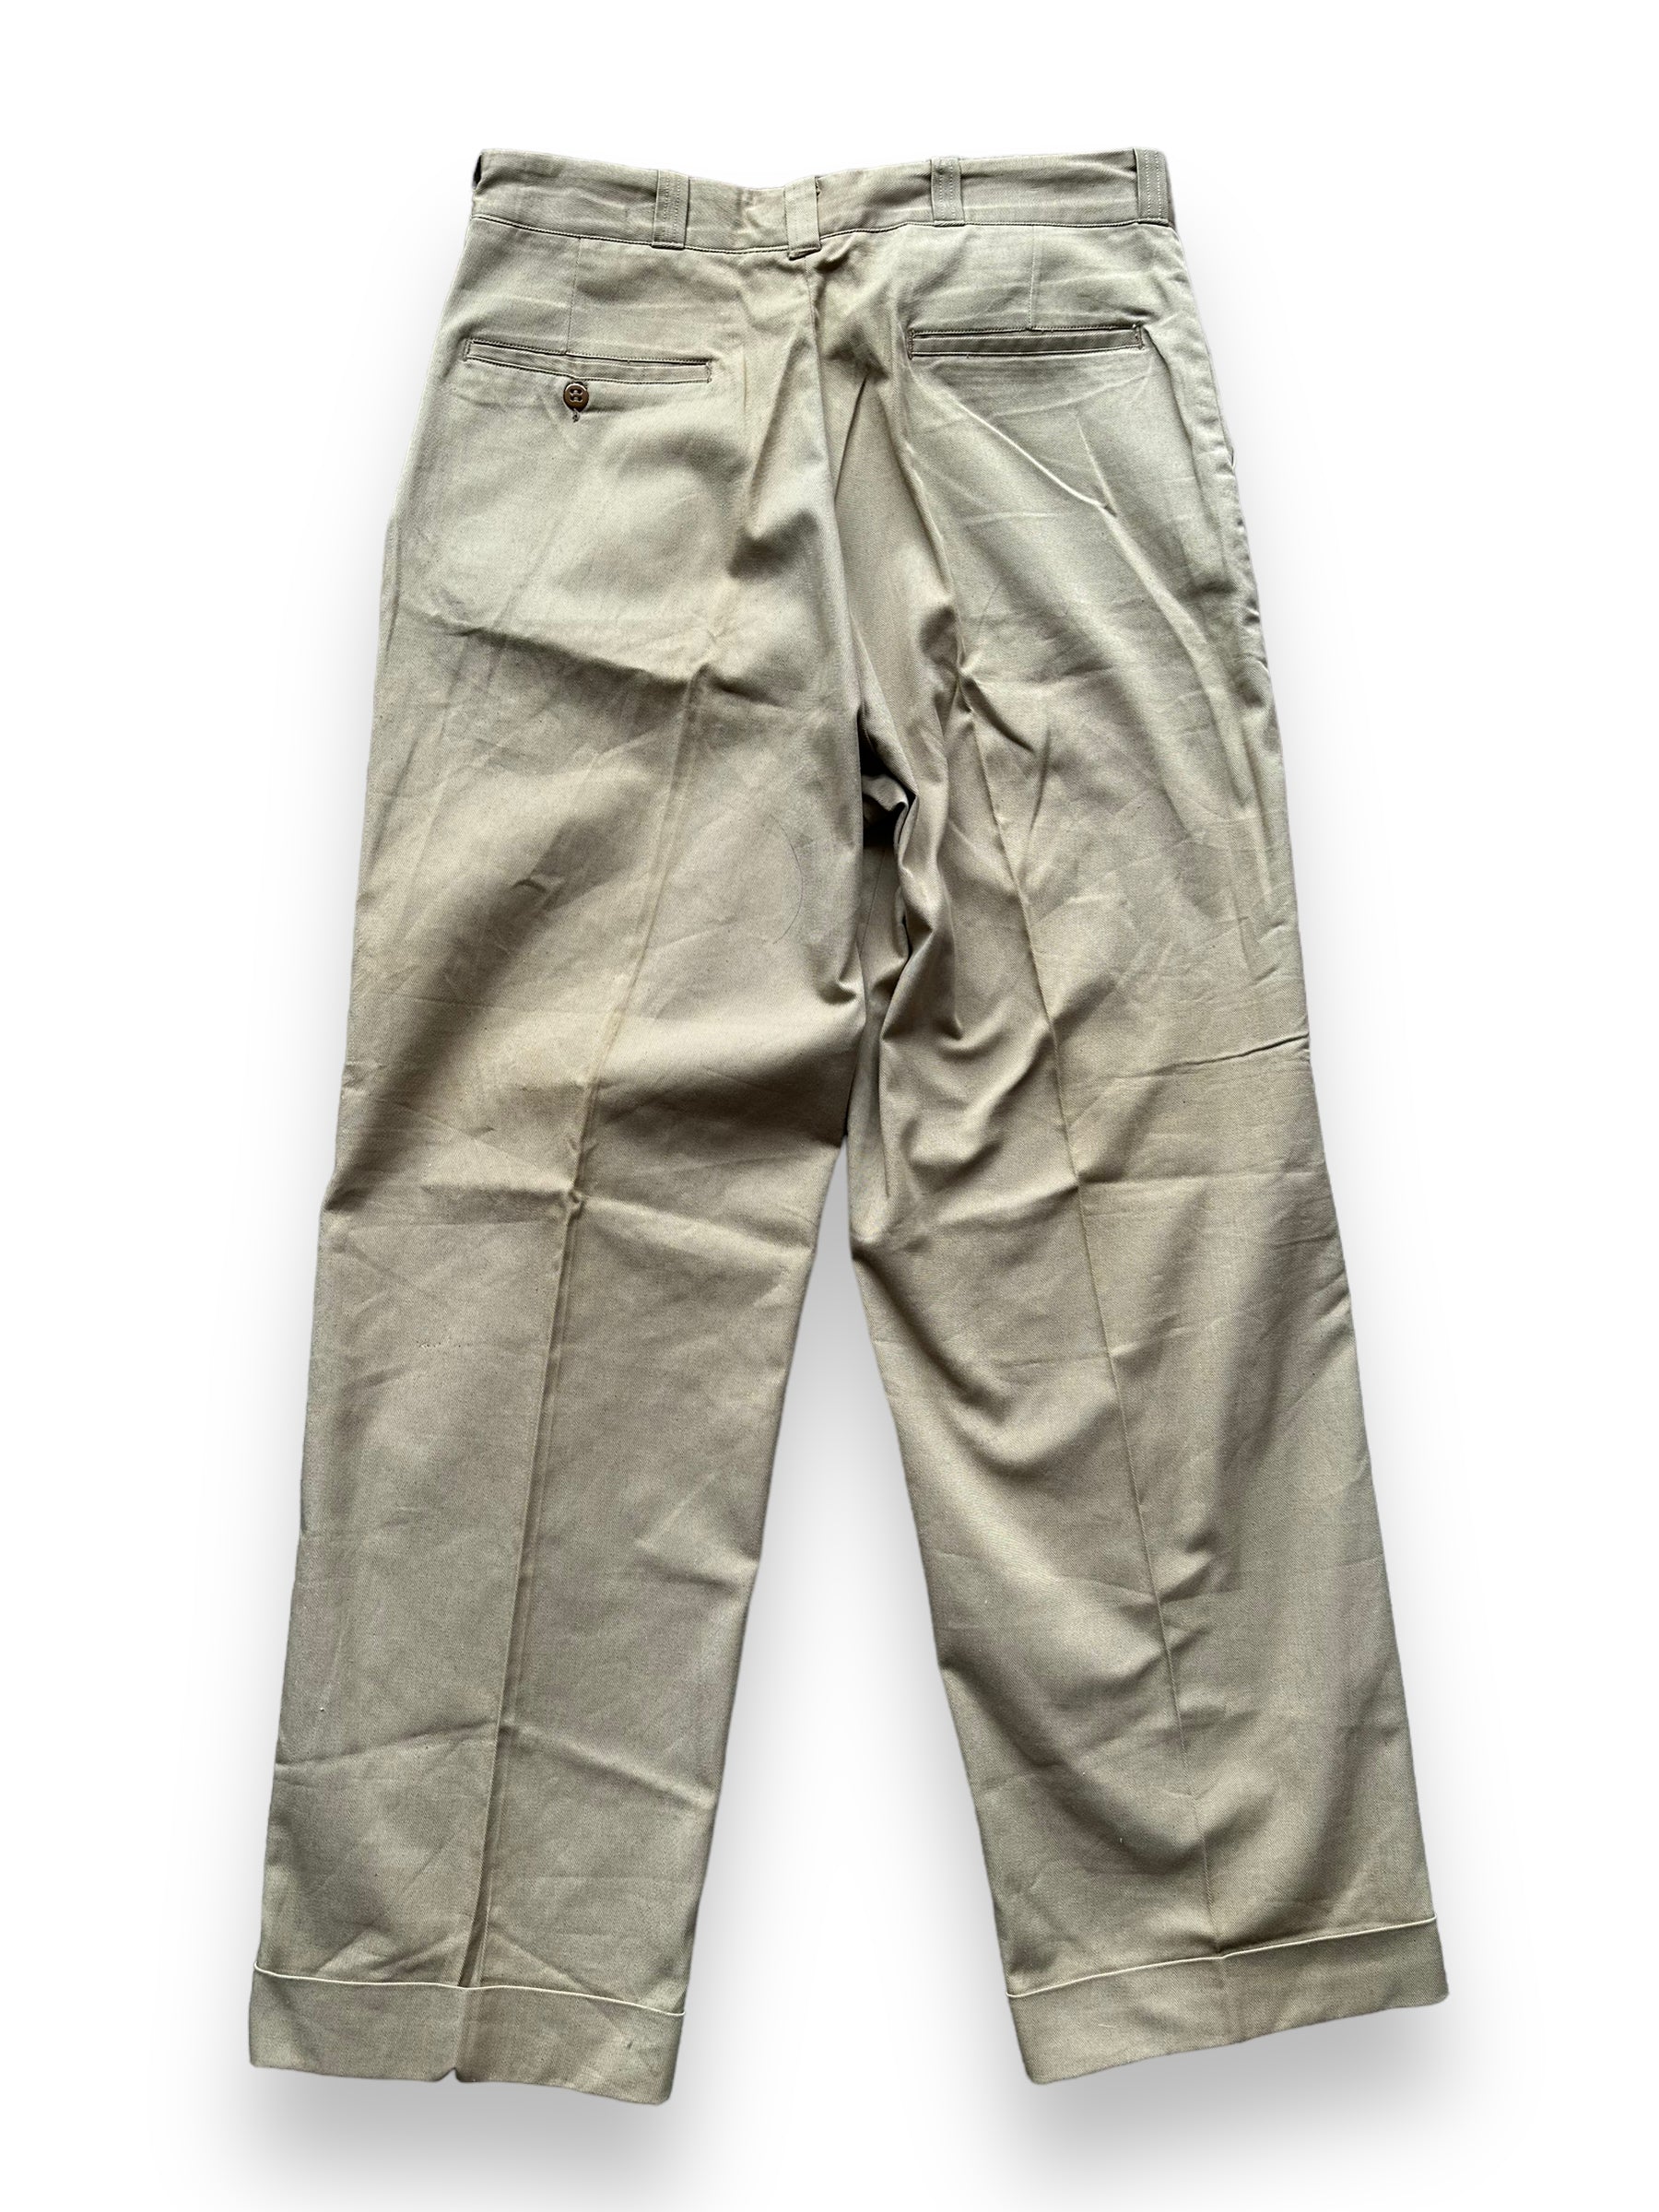 Back close up on Vintage Deadstock Big Ben Military Chinos 32 x 30 | Barn Owl Vintage Seattle | Vintage Military Seattle